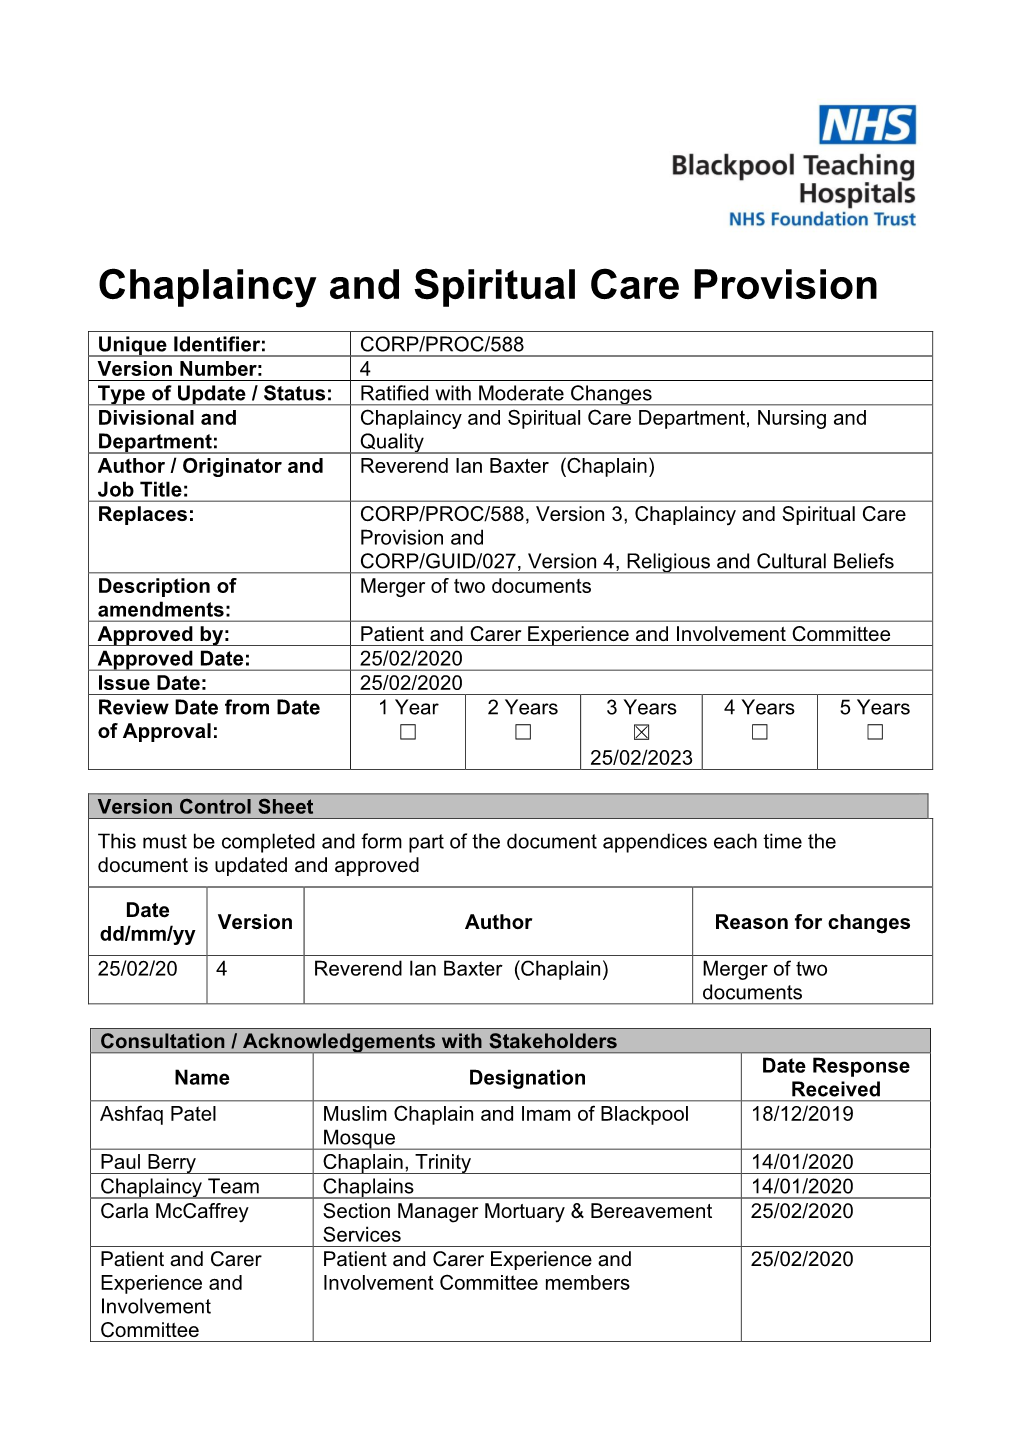 Chaplaincy and Spiritual Care Provision